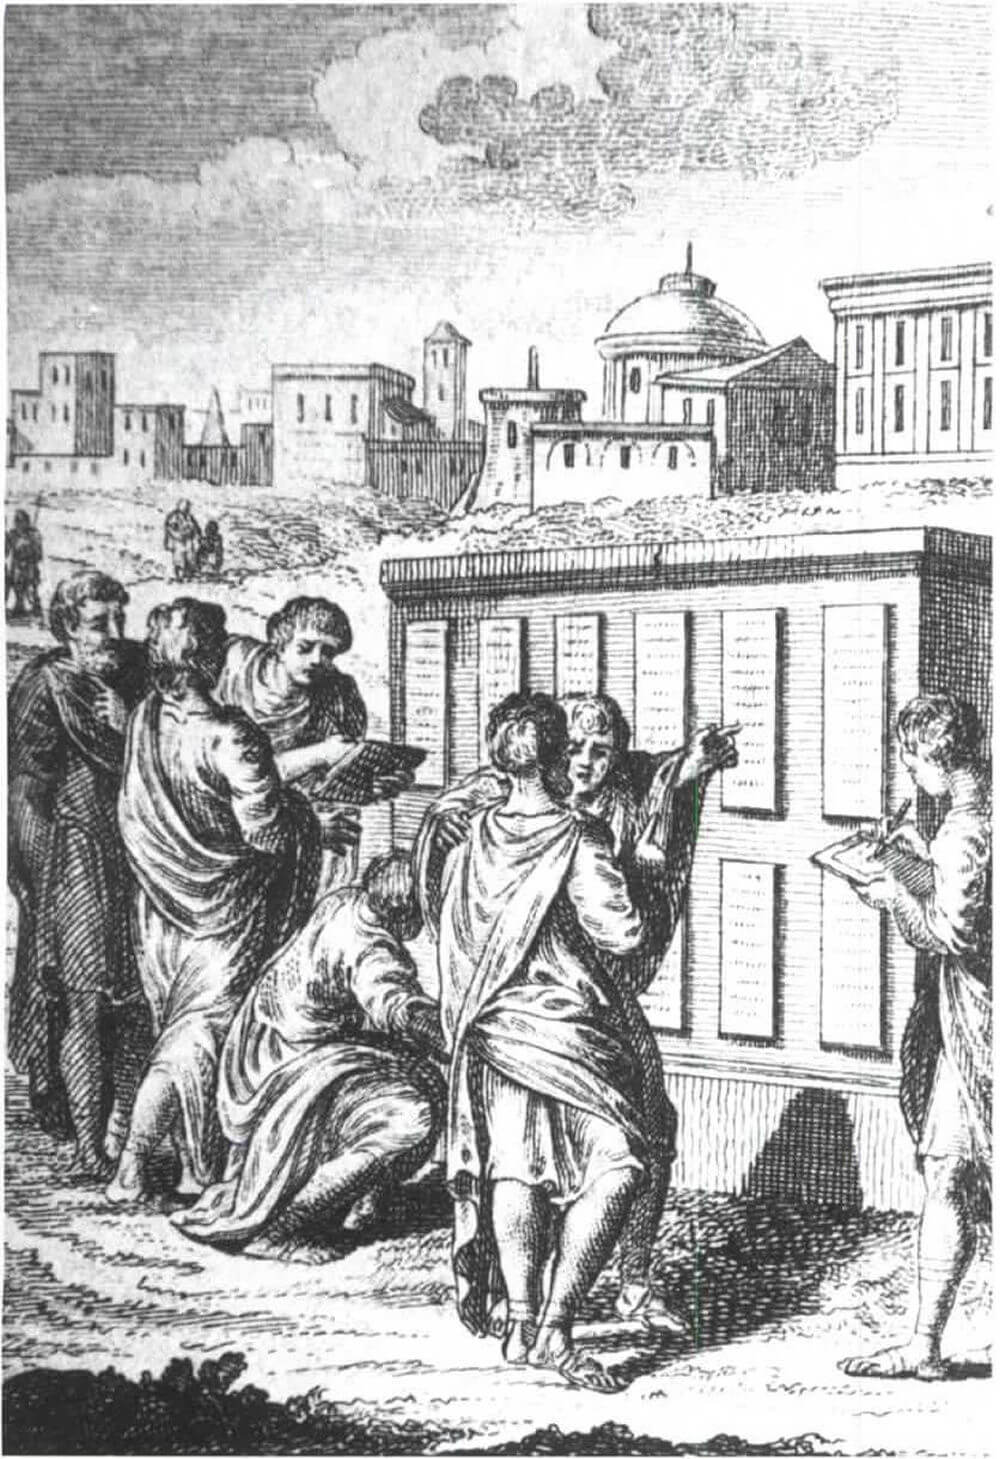 A drawing of ancient Romans inspecting the Twelve Tables of Law in the Forum